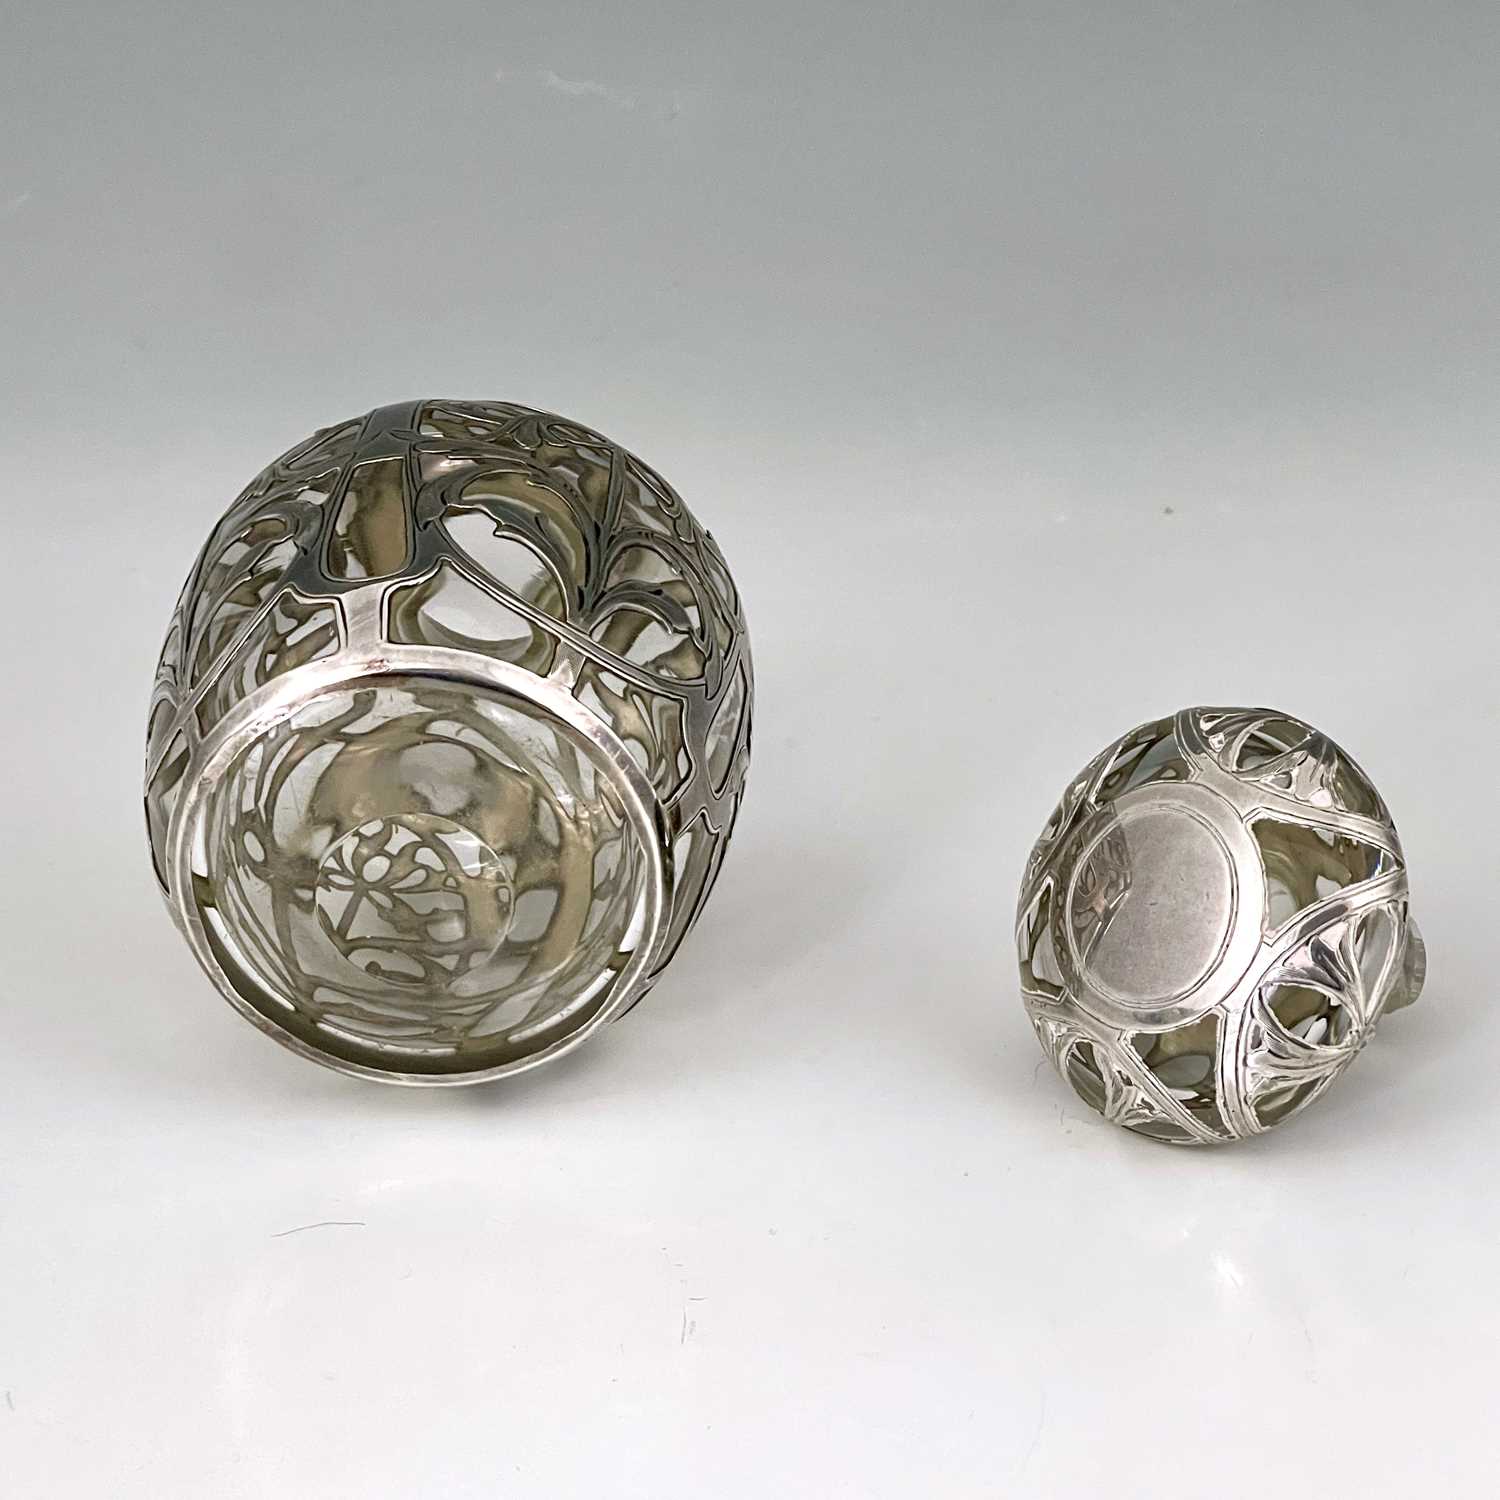 An American Art Nouveau silver overlay glass perfume bottle and stopper, ovoid form, chased with - Image 5 of 5